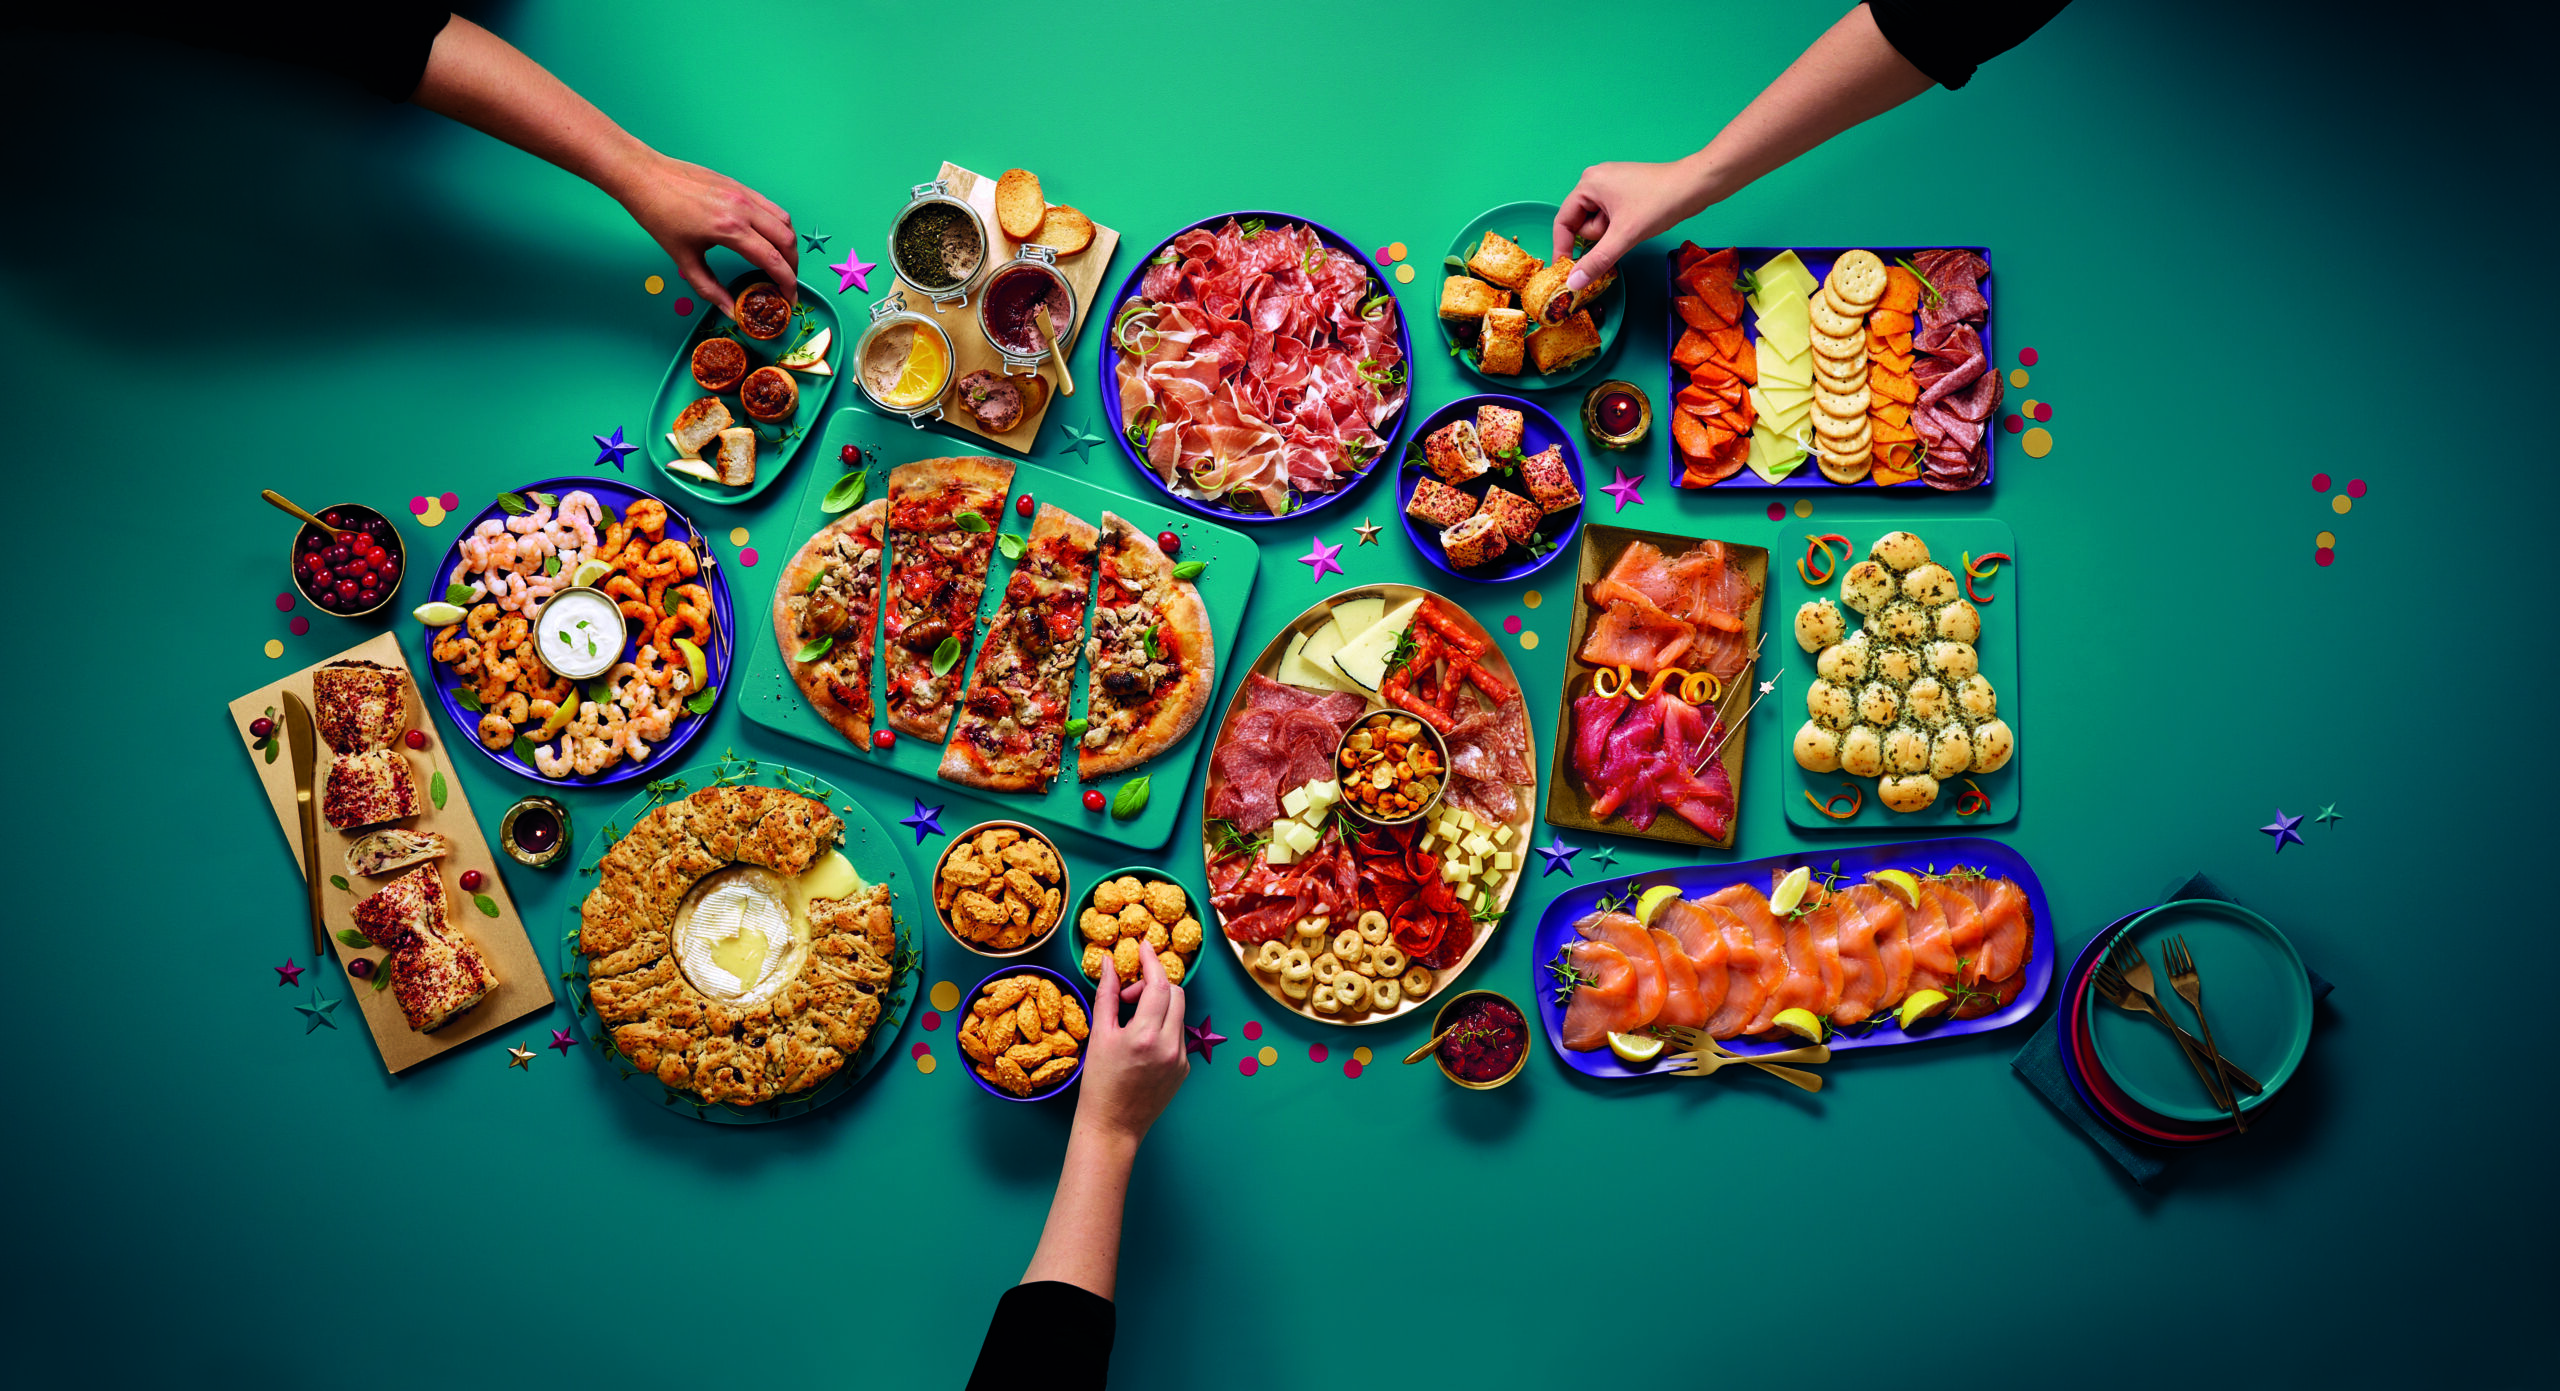 Aldi's Christmas party food range arranged as a platter including pizza, meats, cheeses, cheese, and more